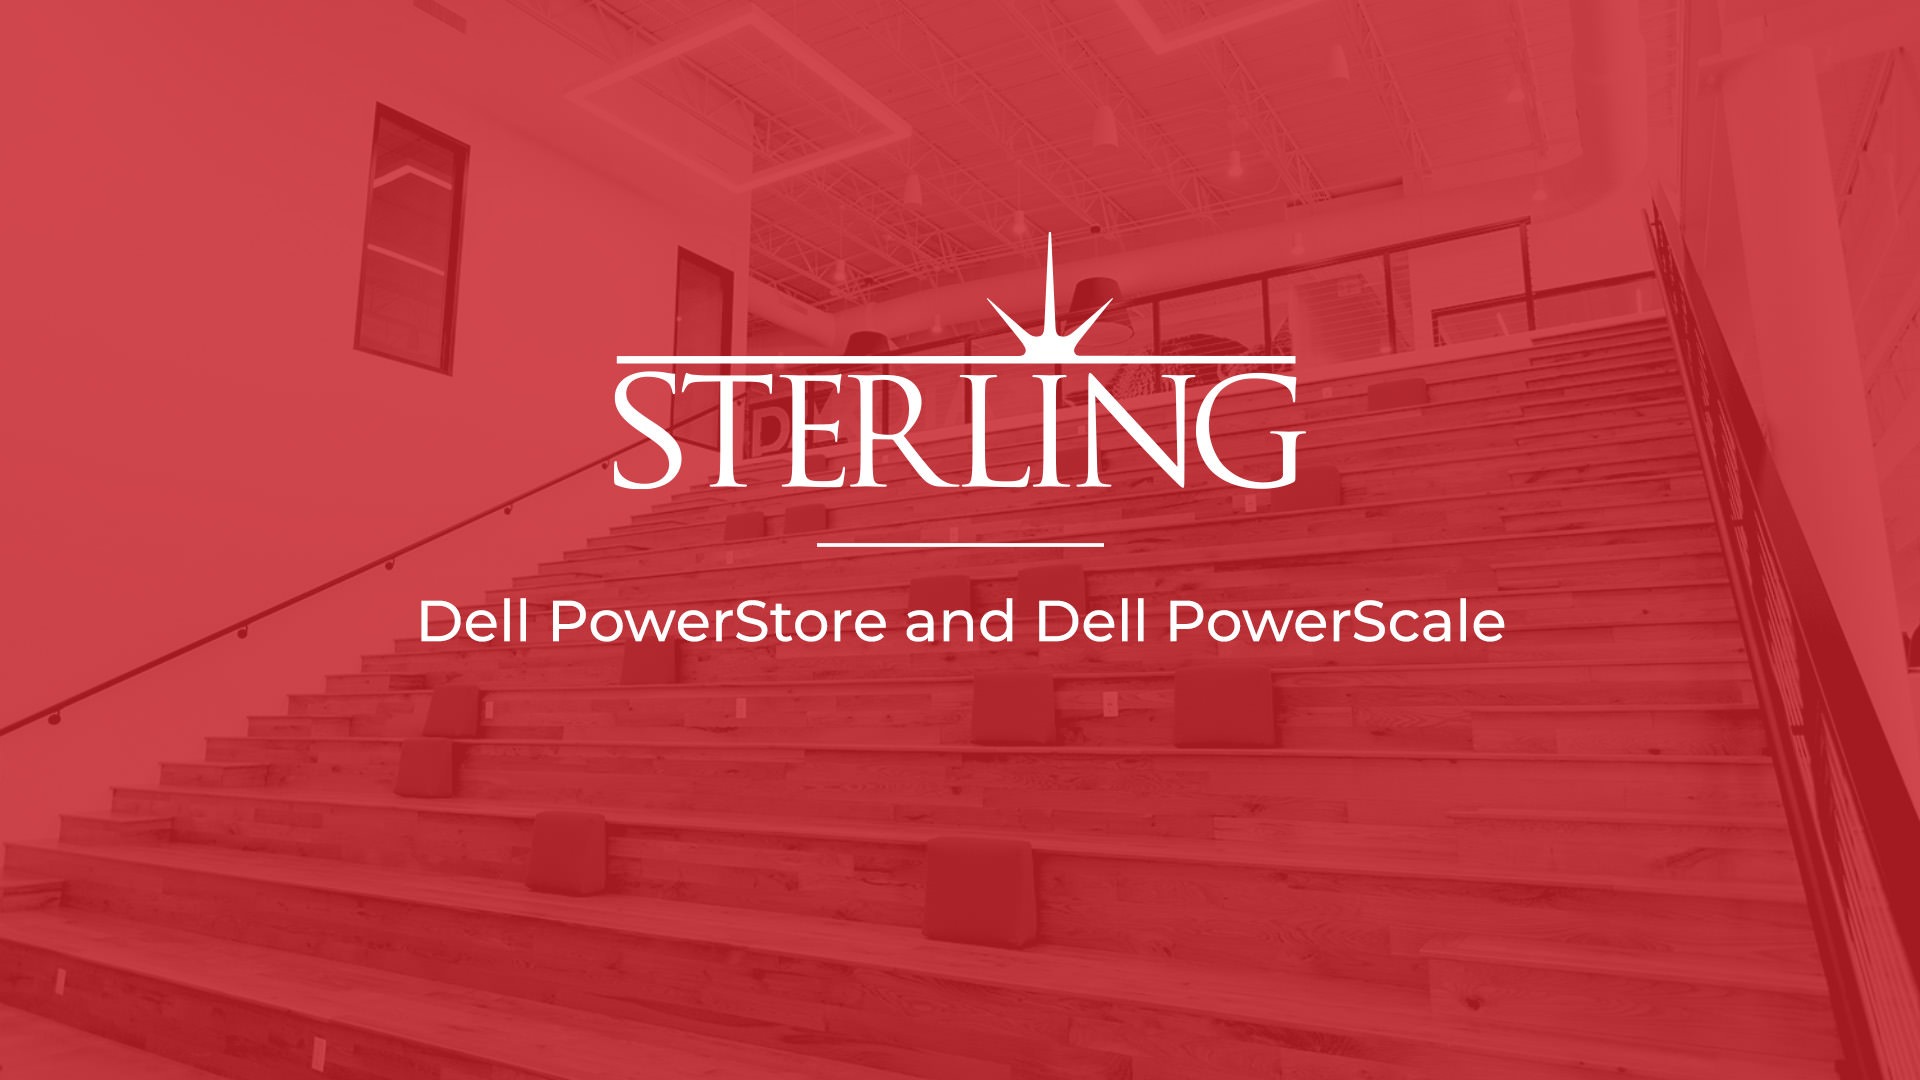 Dell PowerStore and Dell PowerScale